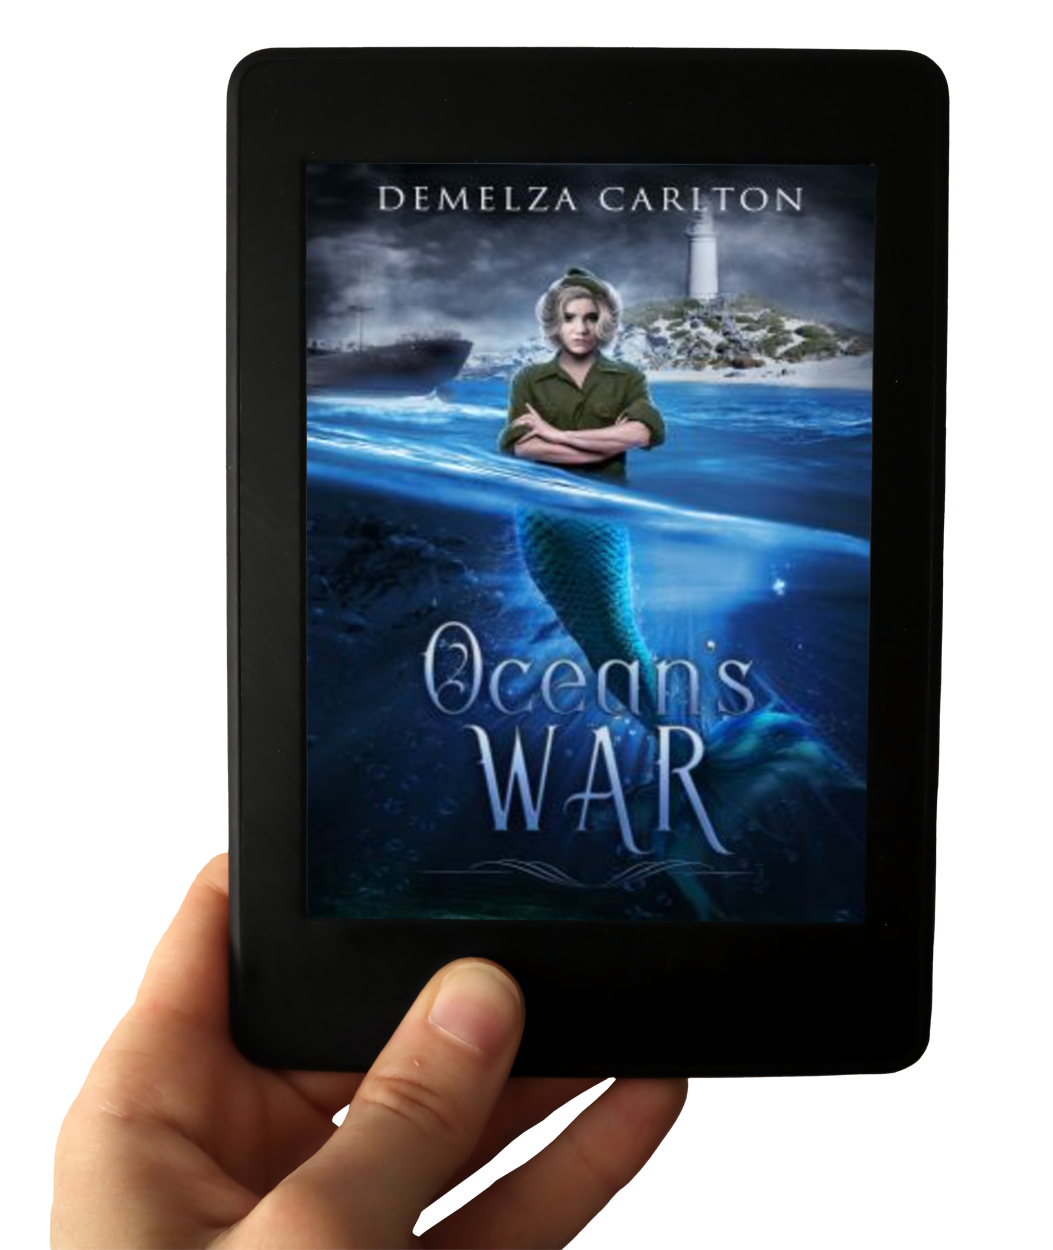 Ocean's War Book 5 in the Siren of War series by USA Today Bestselling Author Demelza Carlton ebook